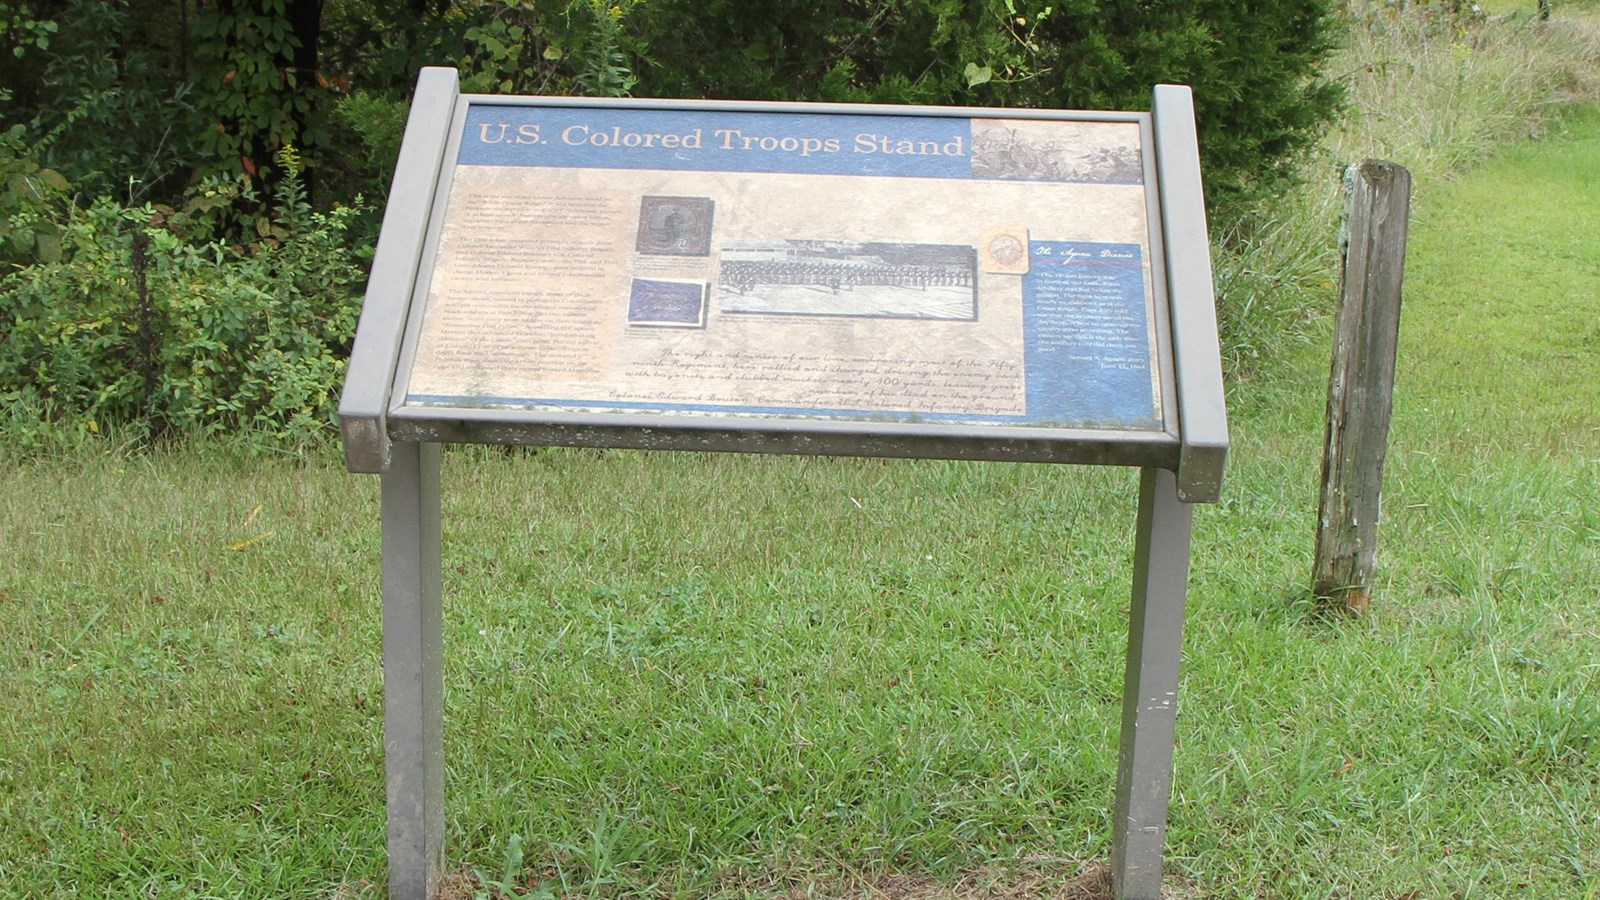 Information panel with brown base behind a paved sidewalk. Mowed grass and trees are behind panel.